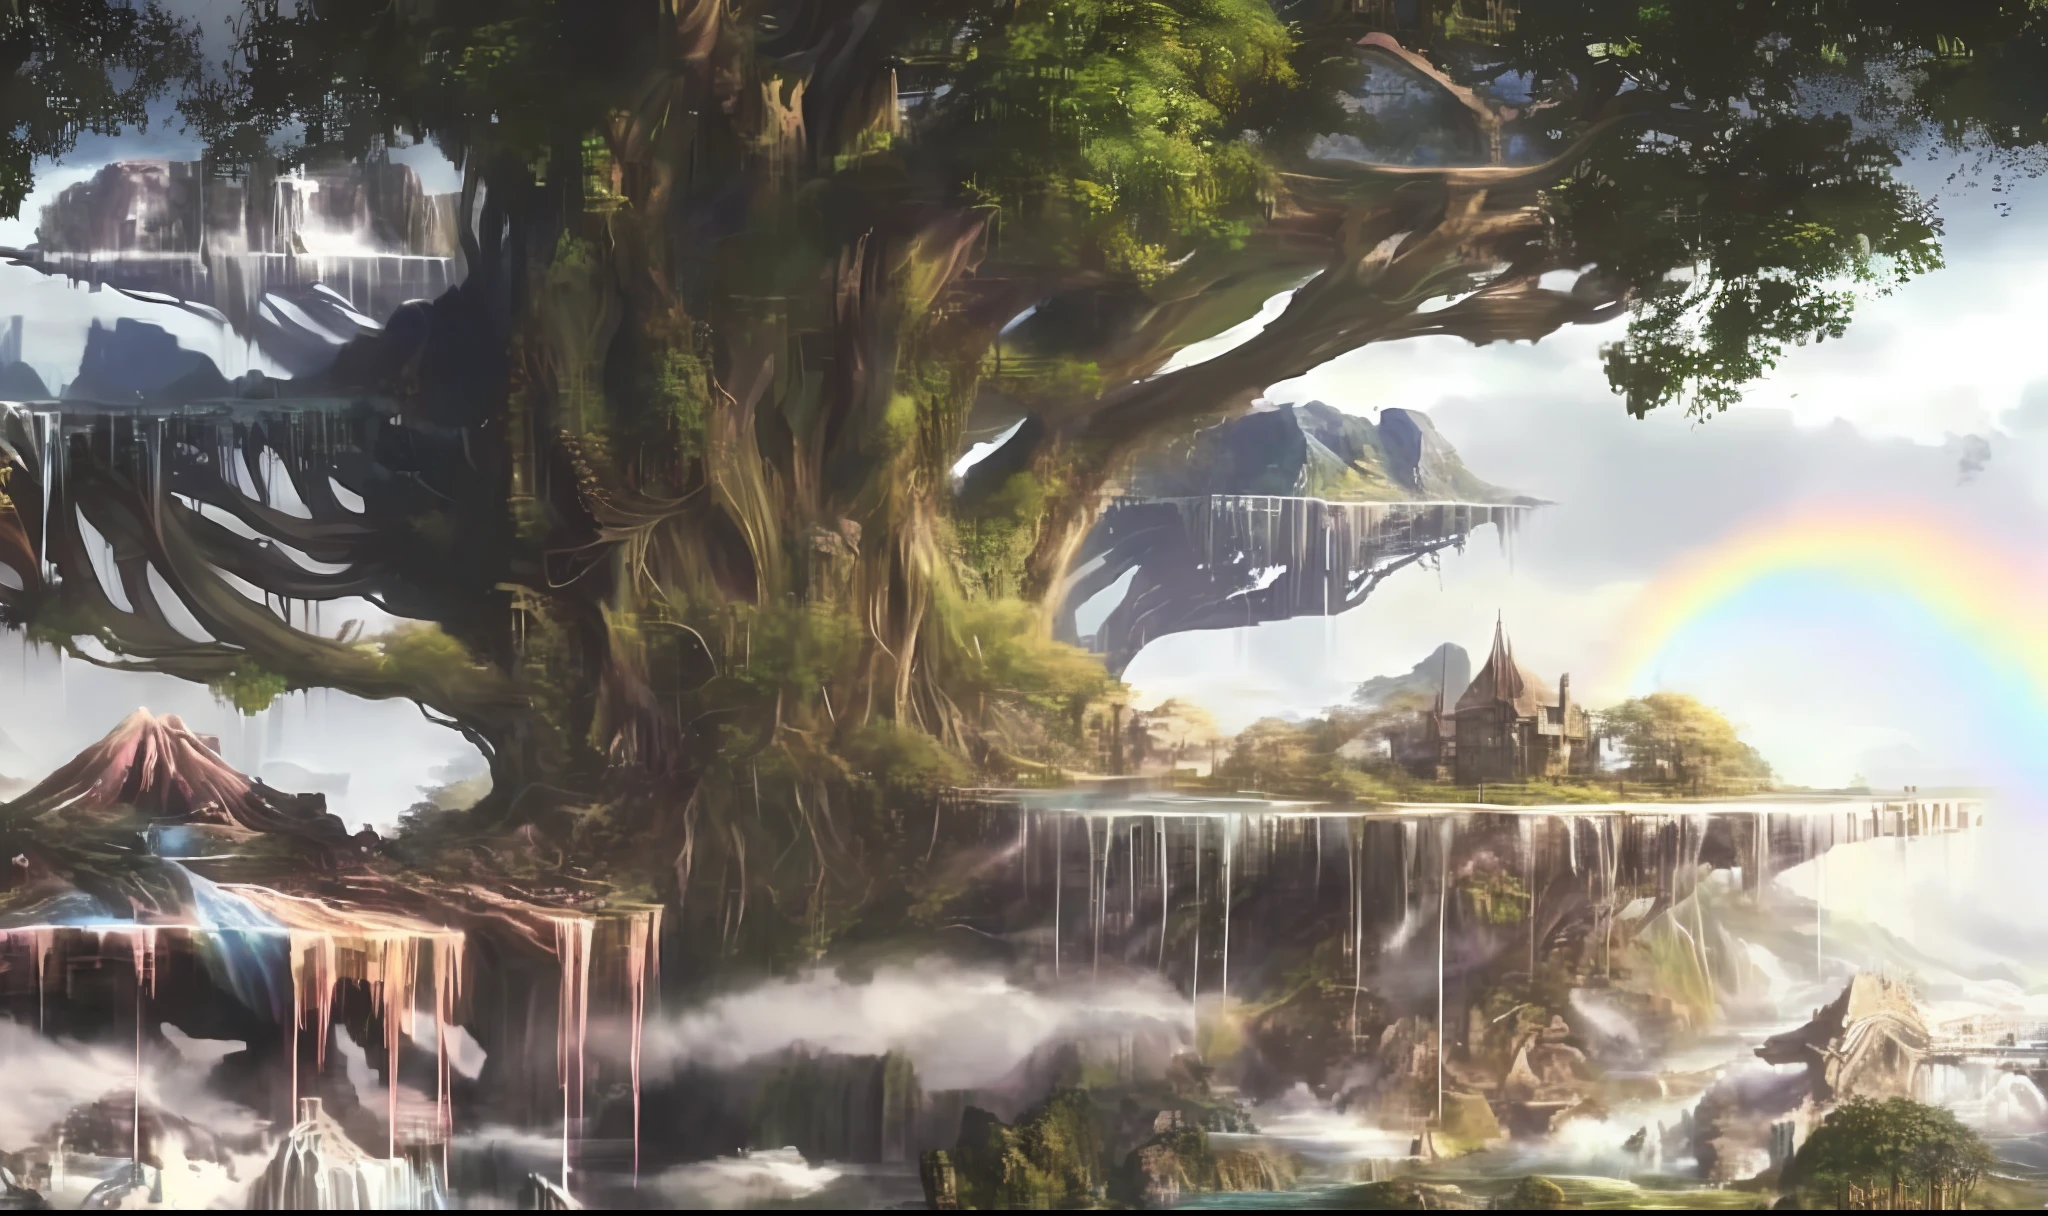 there is a painting of a waterfall and a rainbow in the sky, highly detailed fantasy art, made of tree and fantasy valley, fantasy art landscape, final fantasy vll world concept, hyperrealistic d & d fantasy art, detailed fantasy art, wide angle fantasy art, hyperrealistic fantasy art, unreal engine fantasy art, yggdrasil, fantasyconcept art